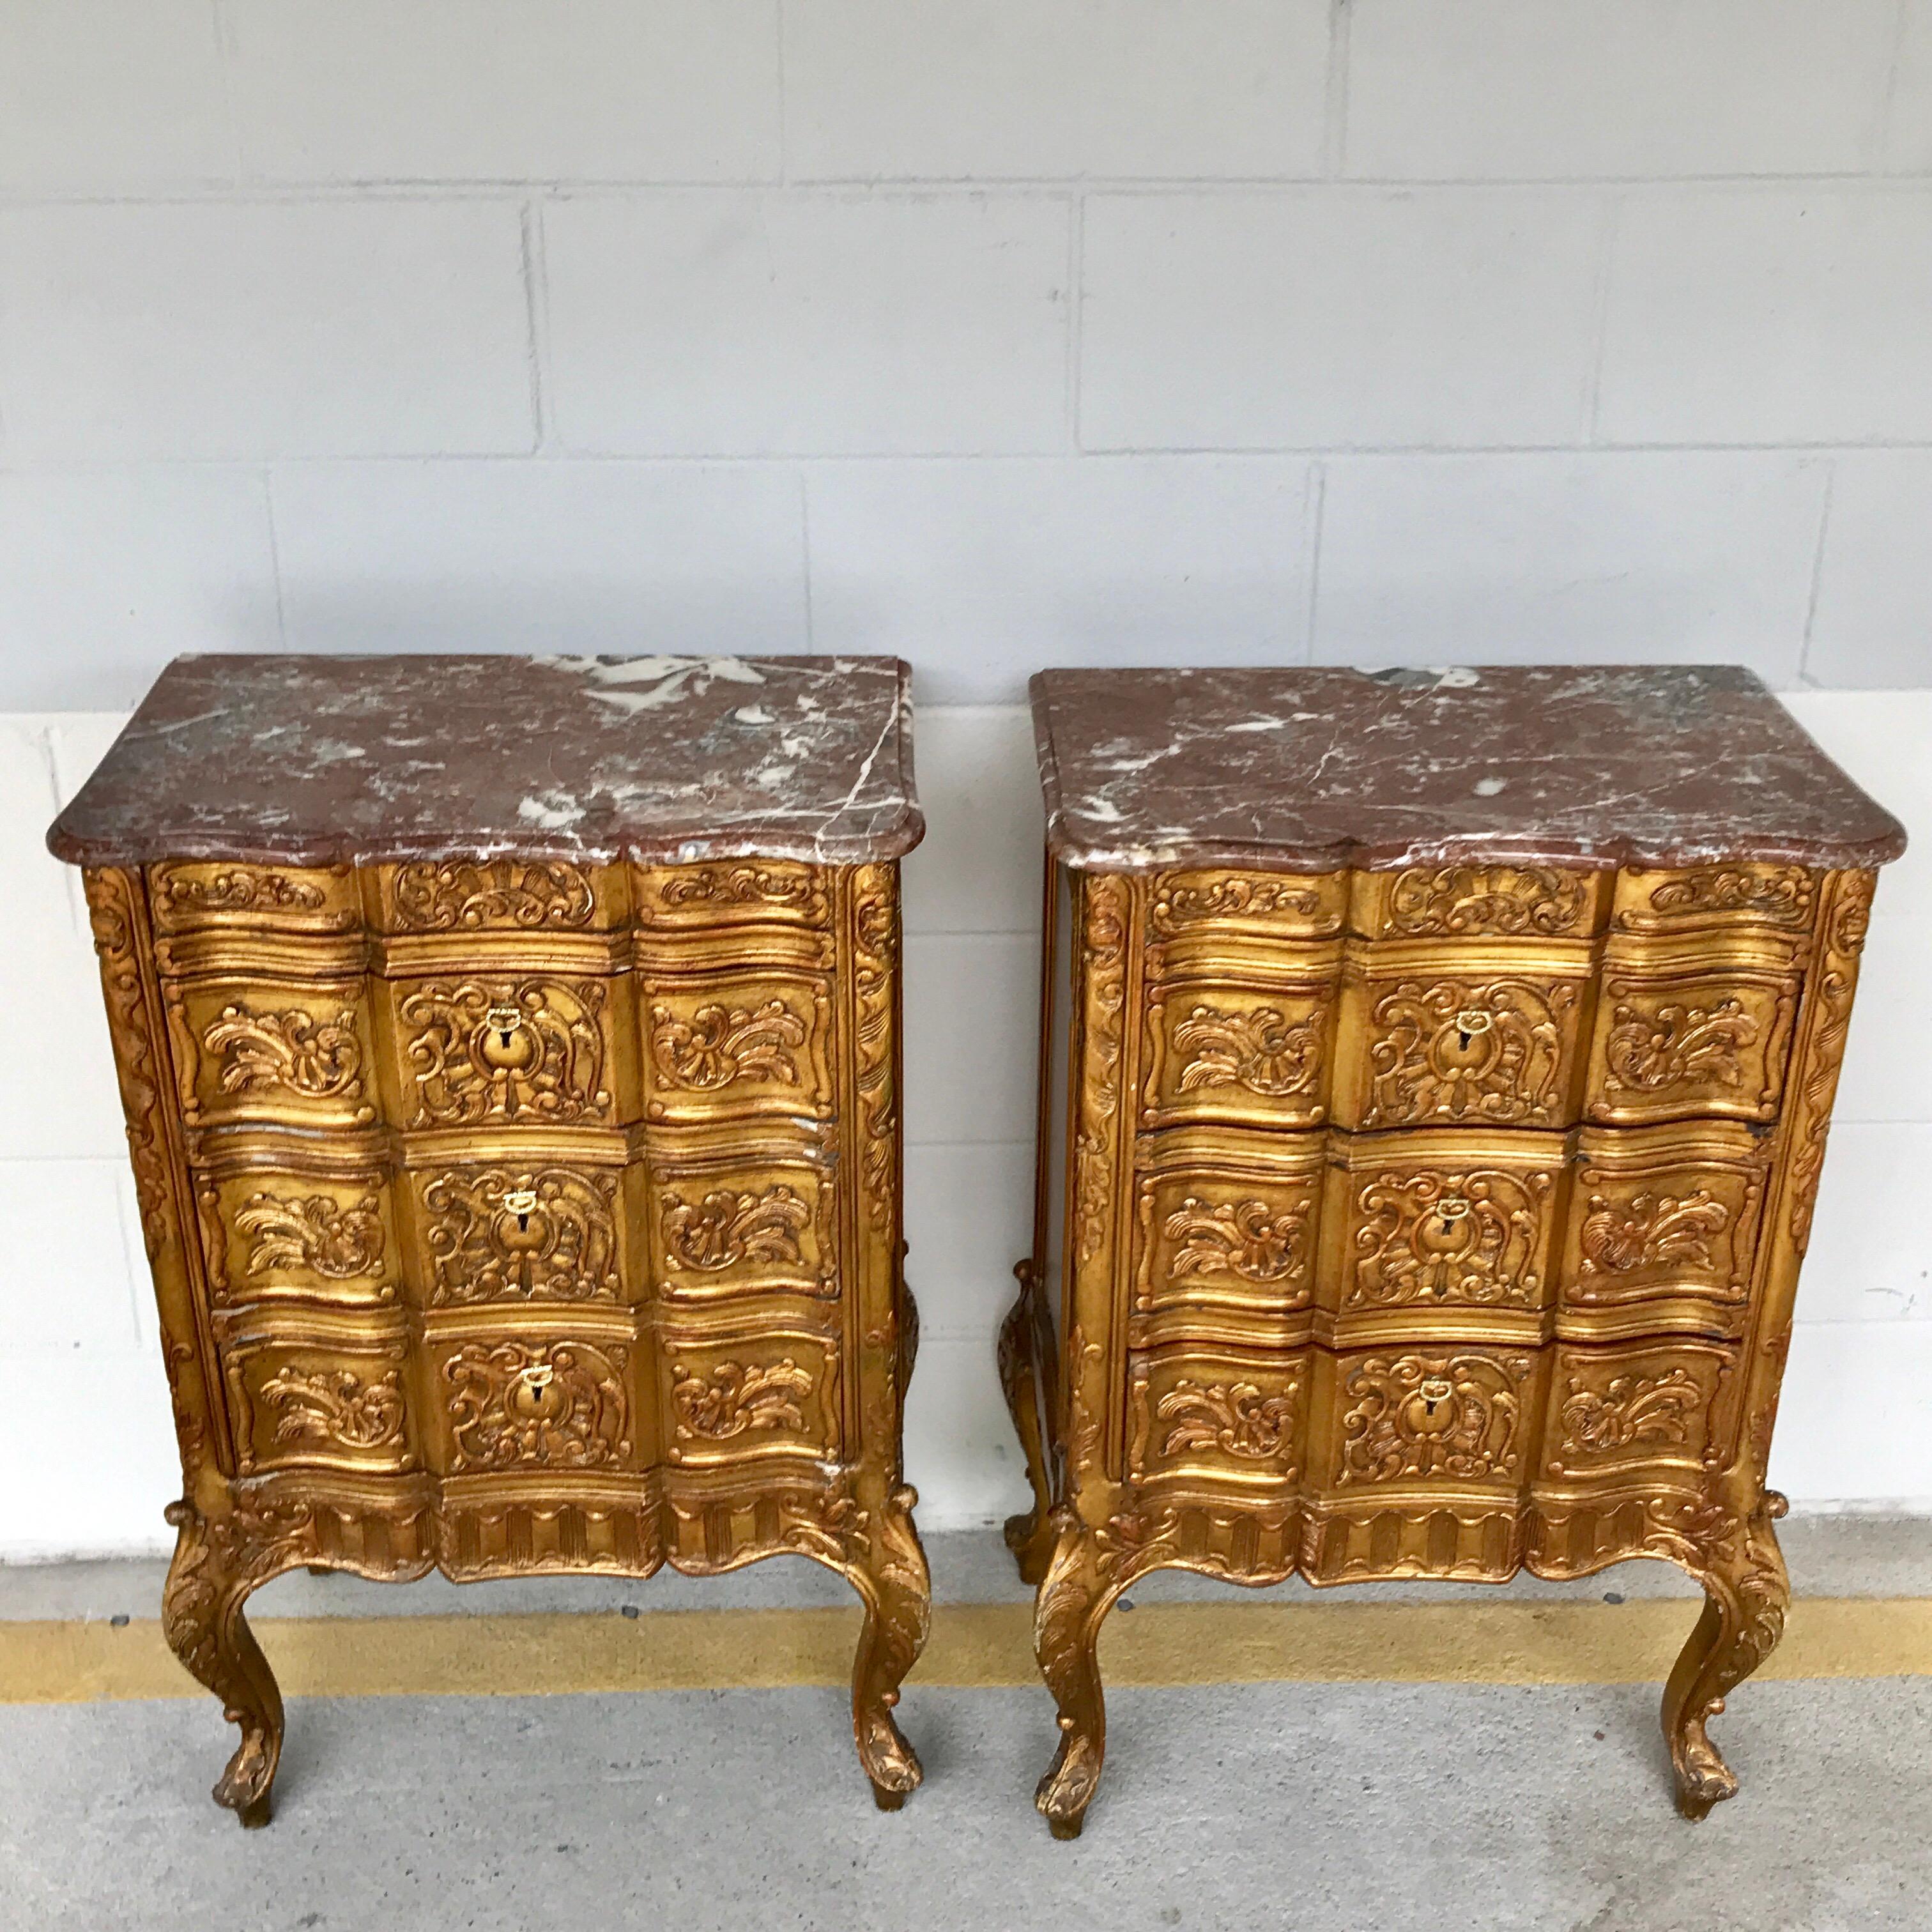 Pair of French giltwood diminutive marble-top commodes, each one with scalloped rose marble tops, over a three 18.5